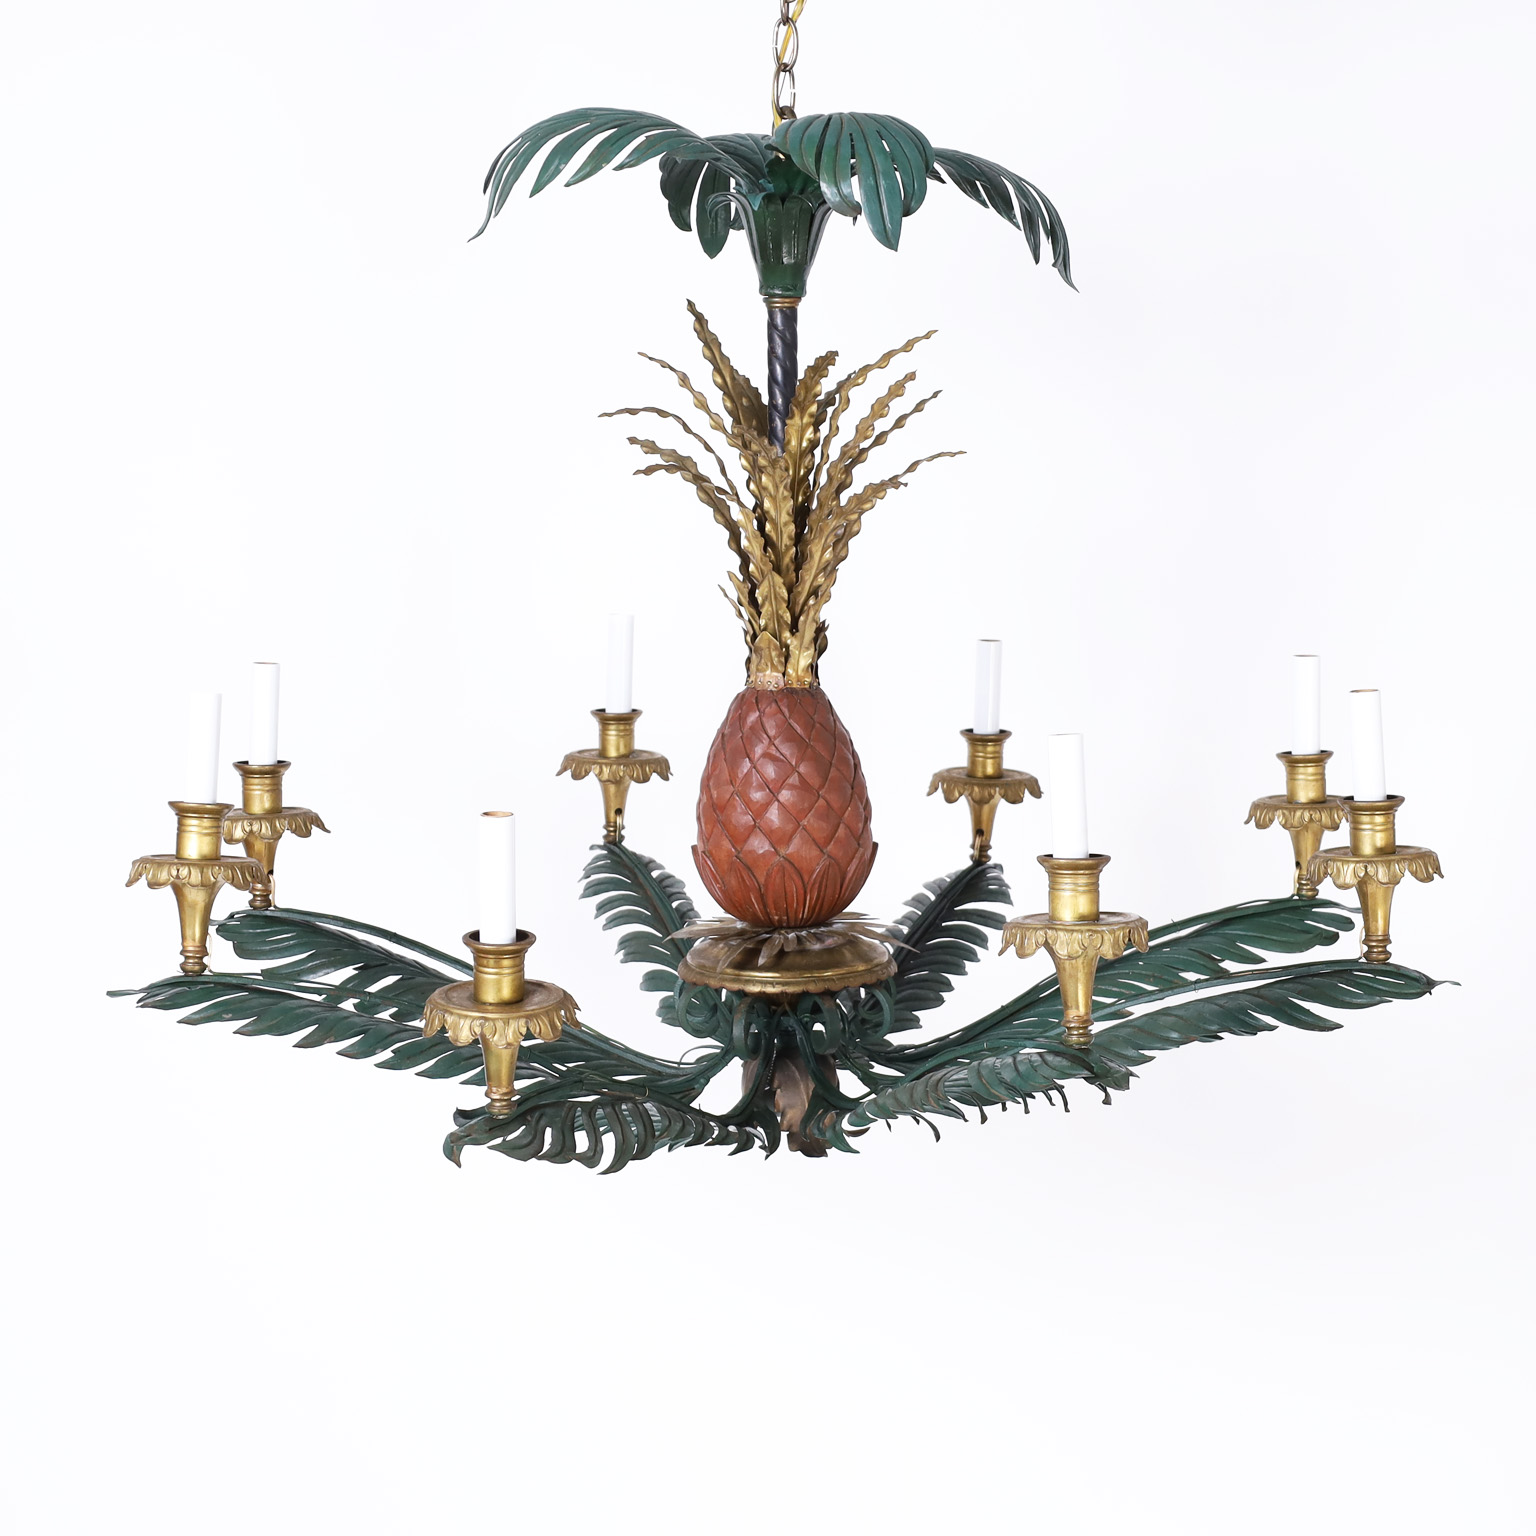 Vintage Toleware Pineapple Chandelier - Italy/France